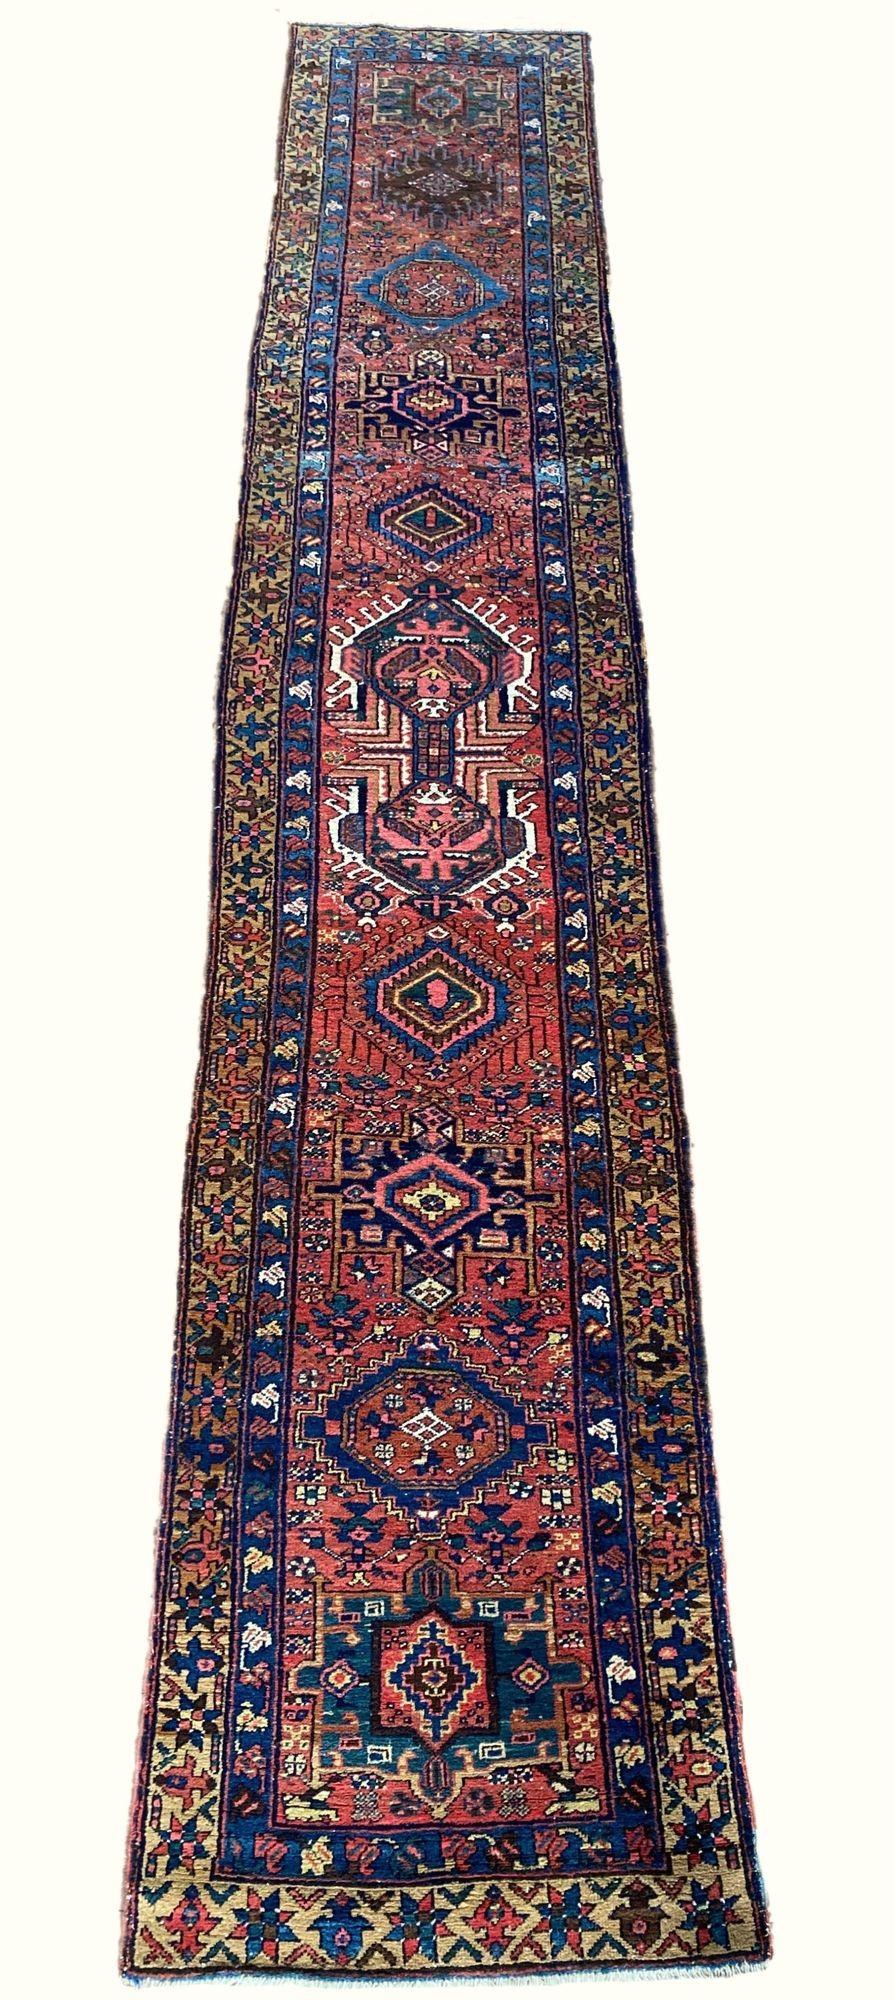 A fabulous antique Heriz runner, hand woven circa 1910. The design features numerous geometrical medallions on a terracotta field and camel border. Lovely secondary colours of pink, light blue and gold.
Size: 4.70m x 0.87m (15ft 5in x 2ft 10in)